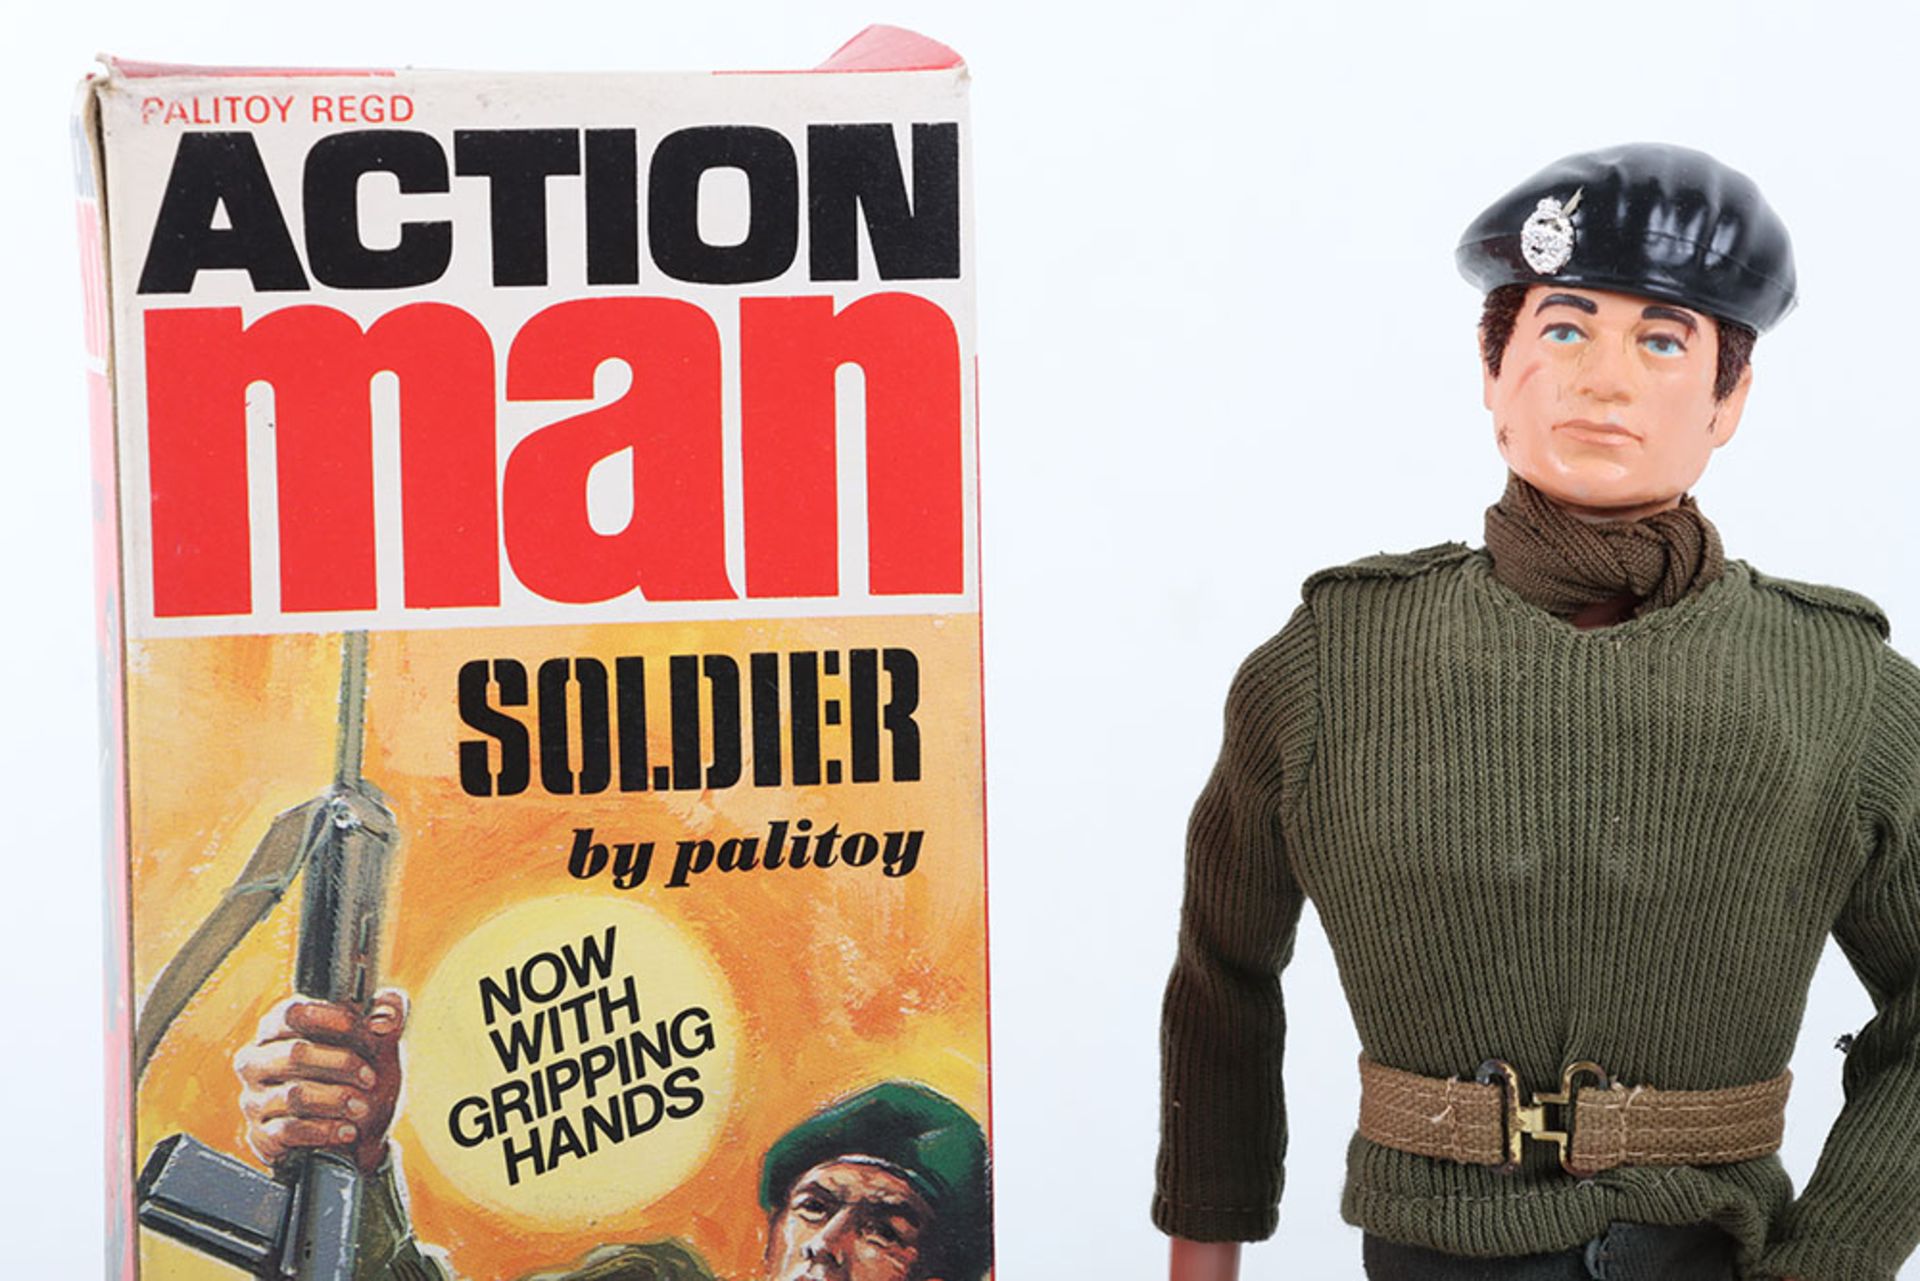 Action Man Boxed Vintage Soldier by Palitoy - Image 2 of 5